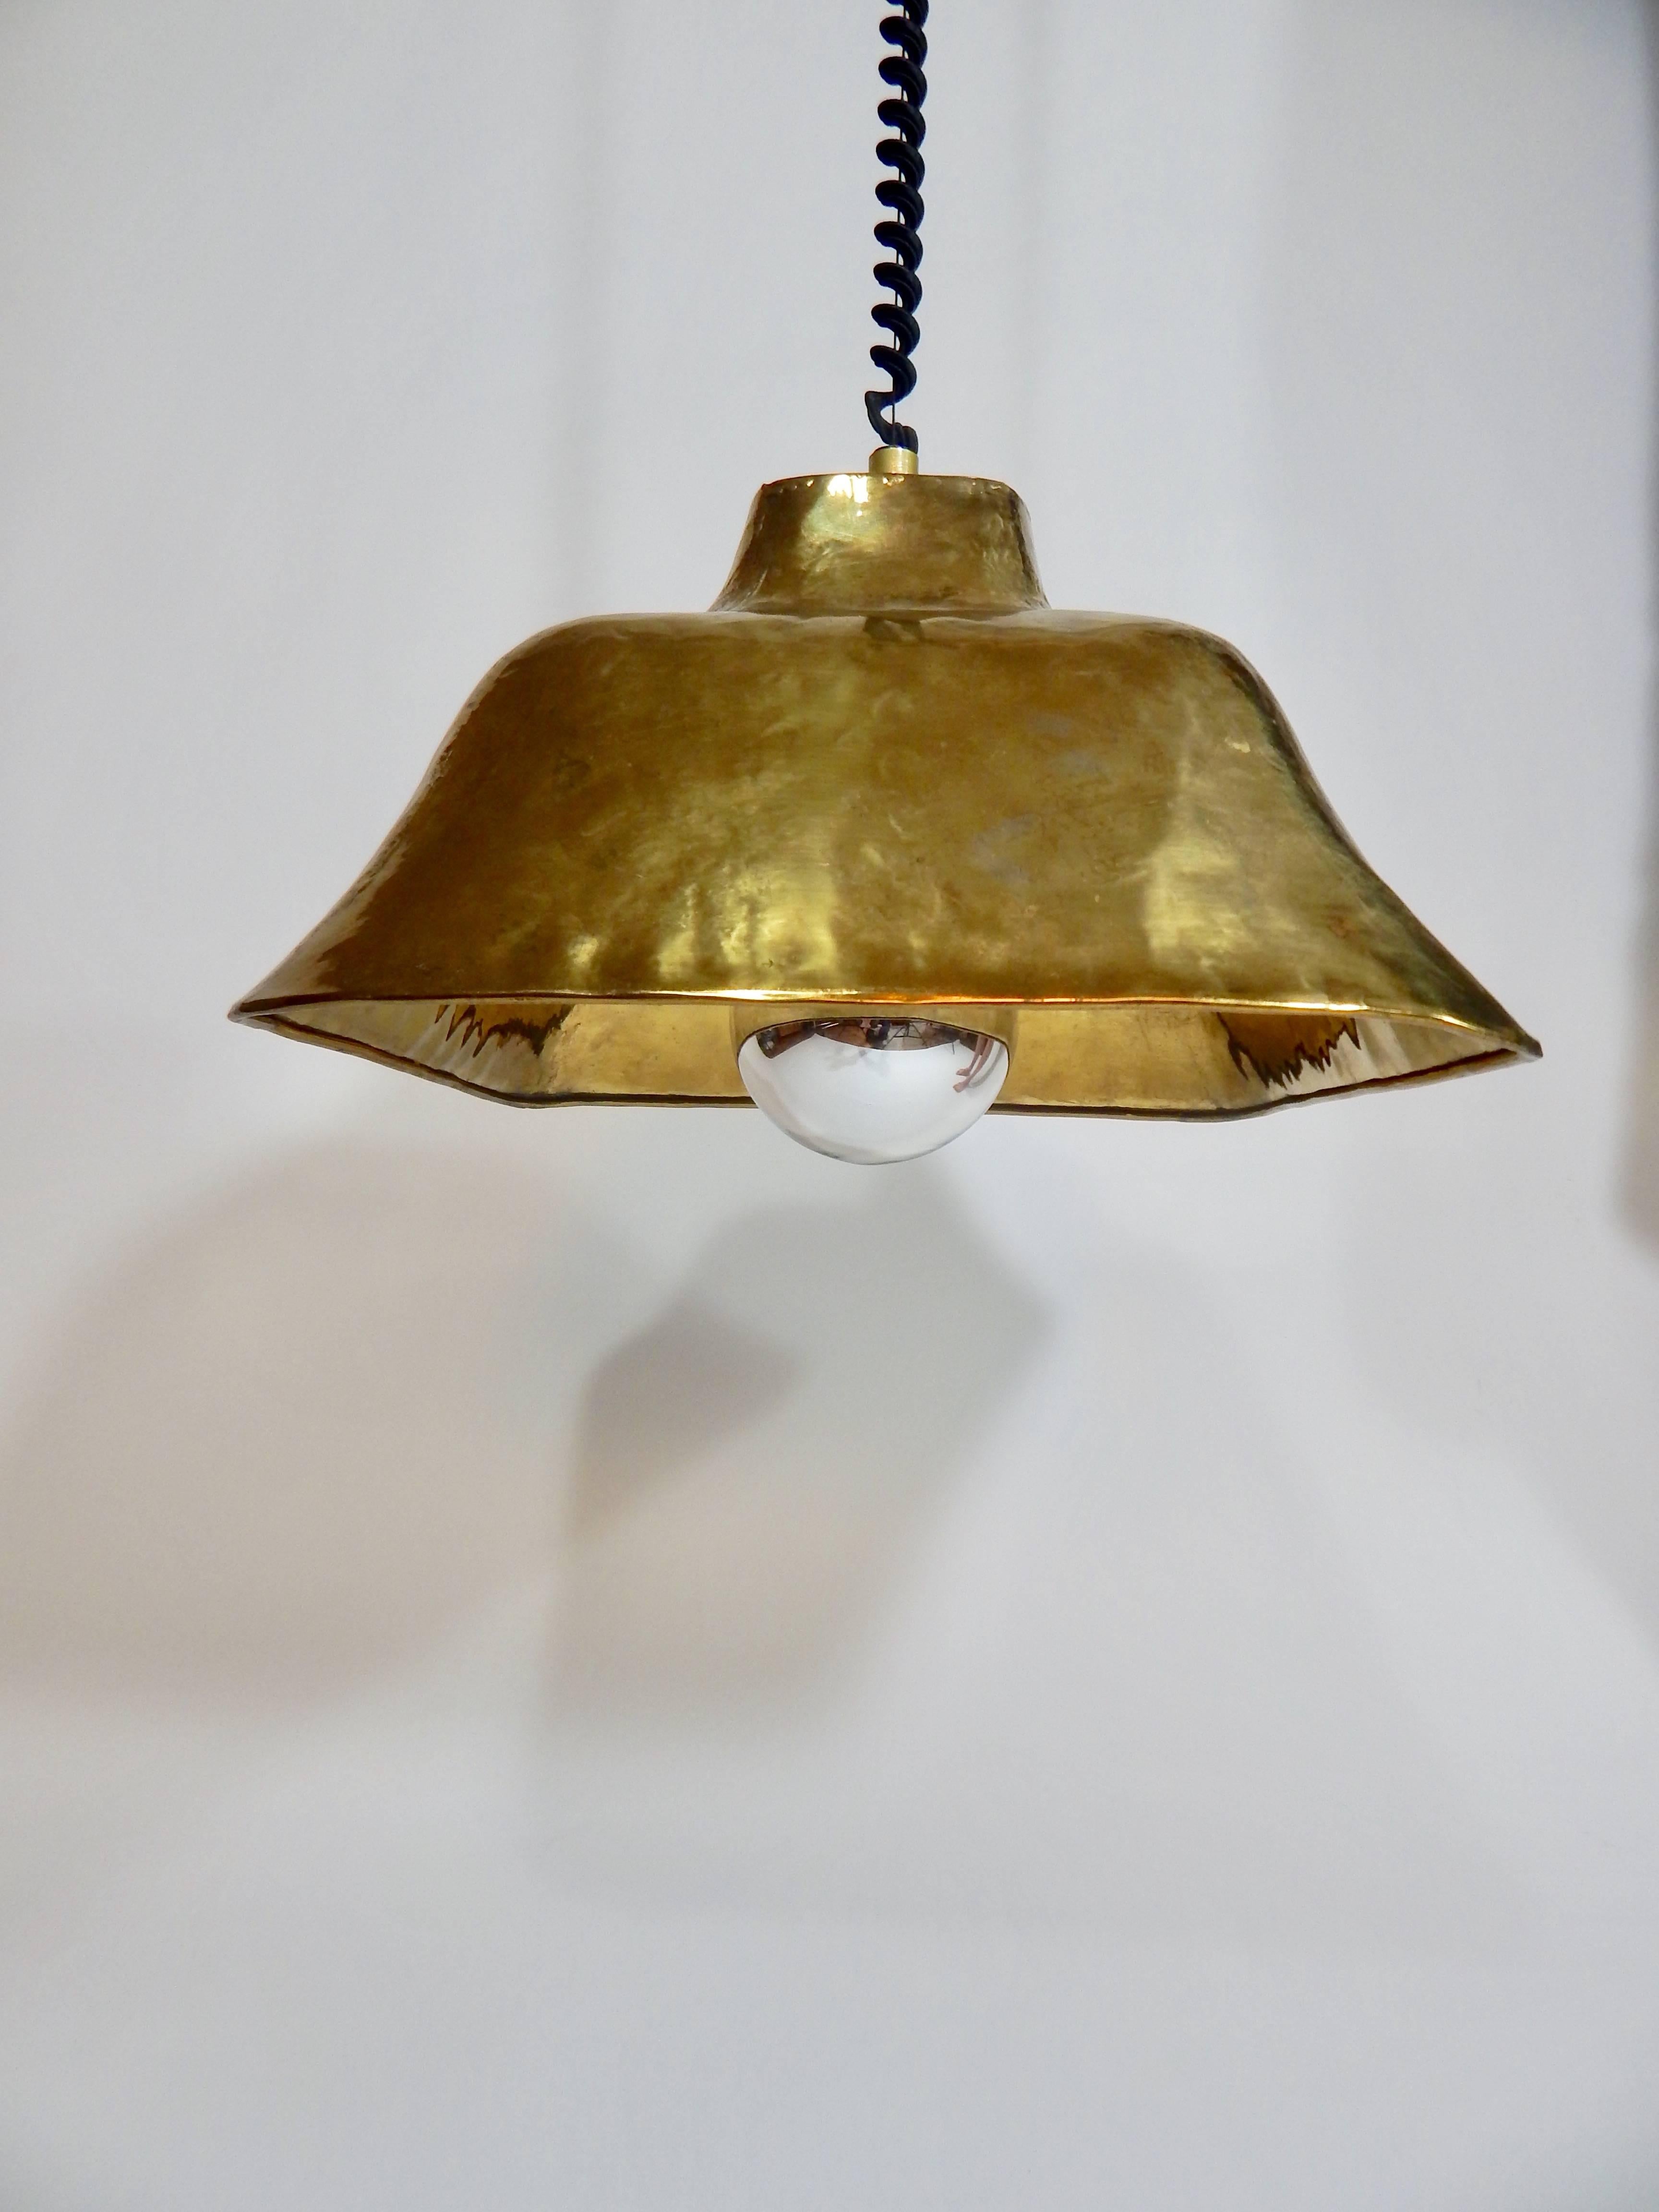 Italian midcentury hanging lamp marked Italy and dated 1974. Large globe bulb with chrome plating. Shade is brass over metal. Hanging cord is retractable and easily positioned up or down or any position in between. The retractable device was named